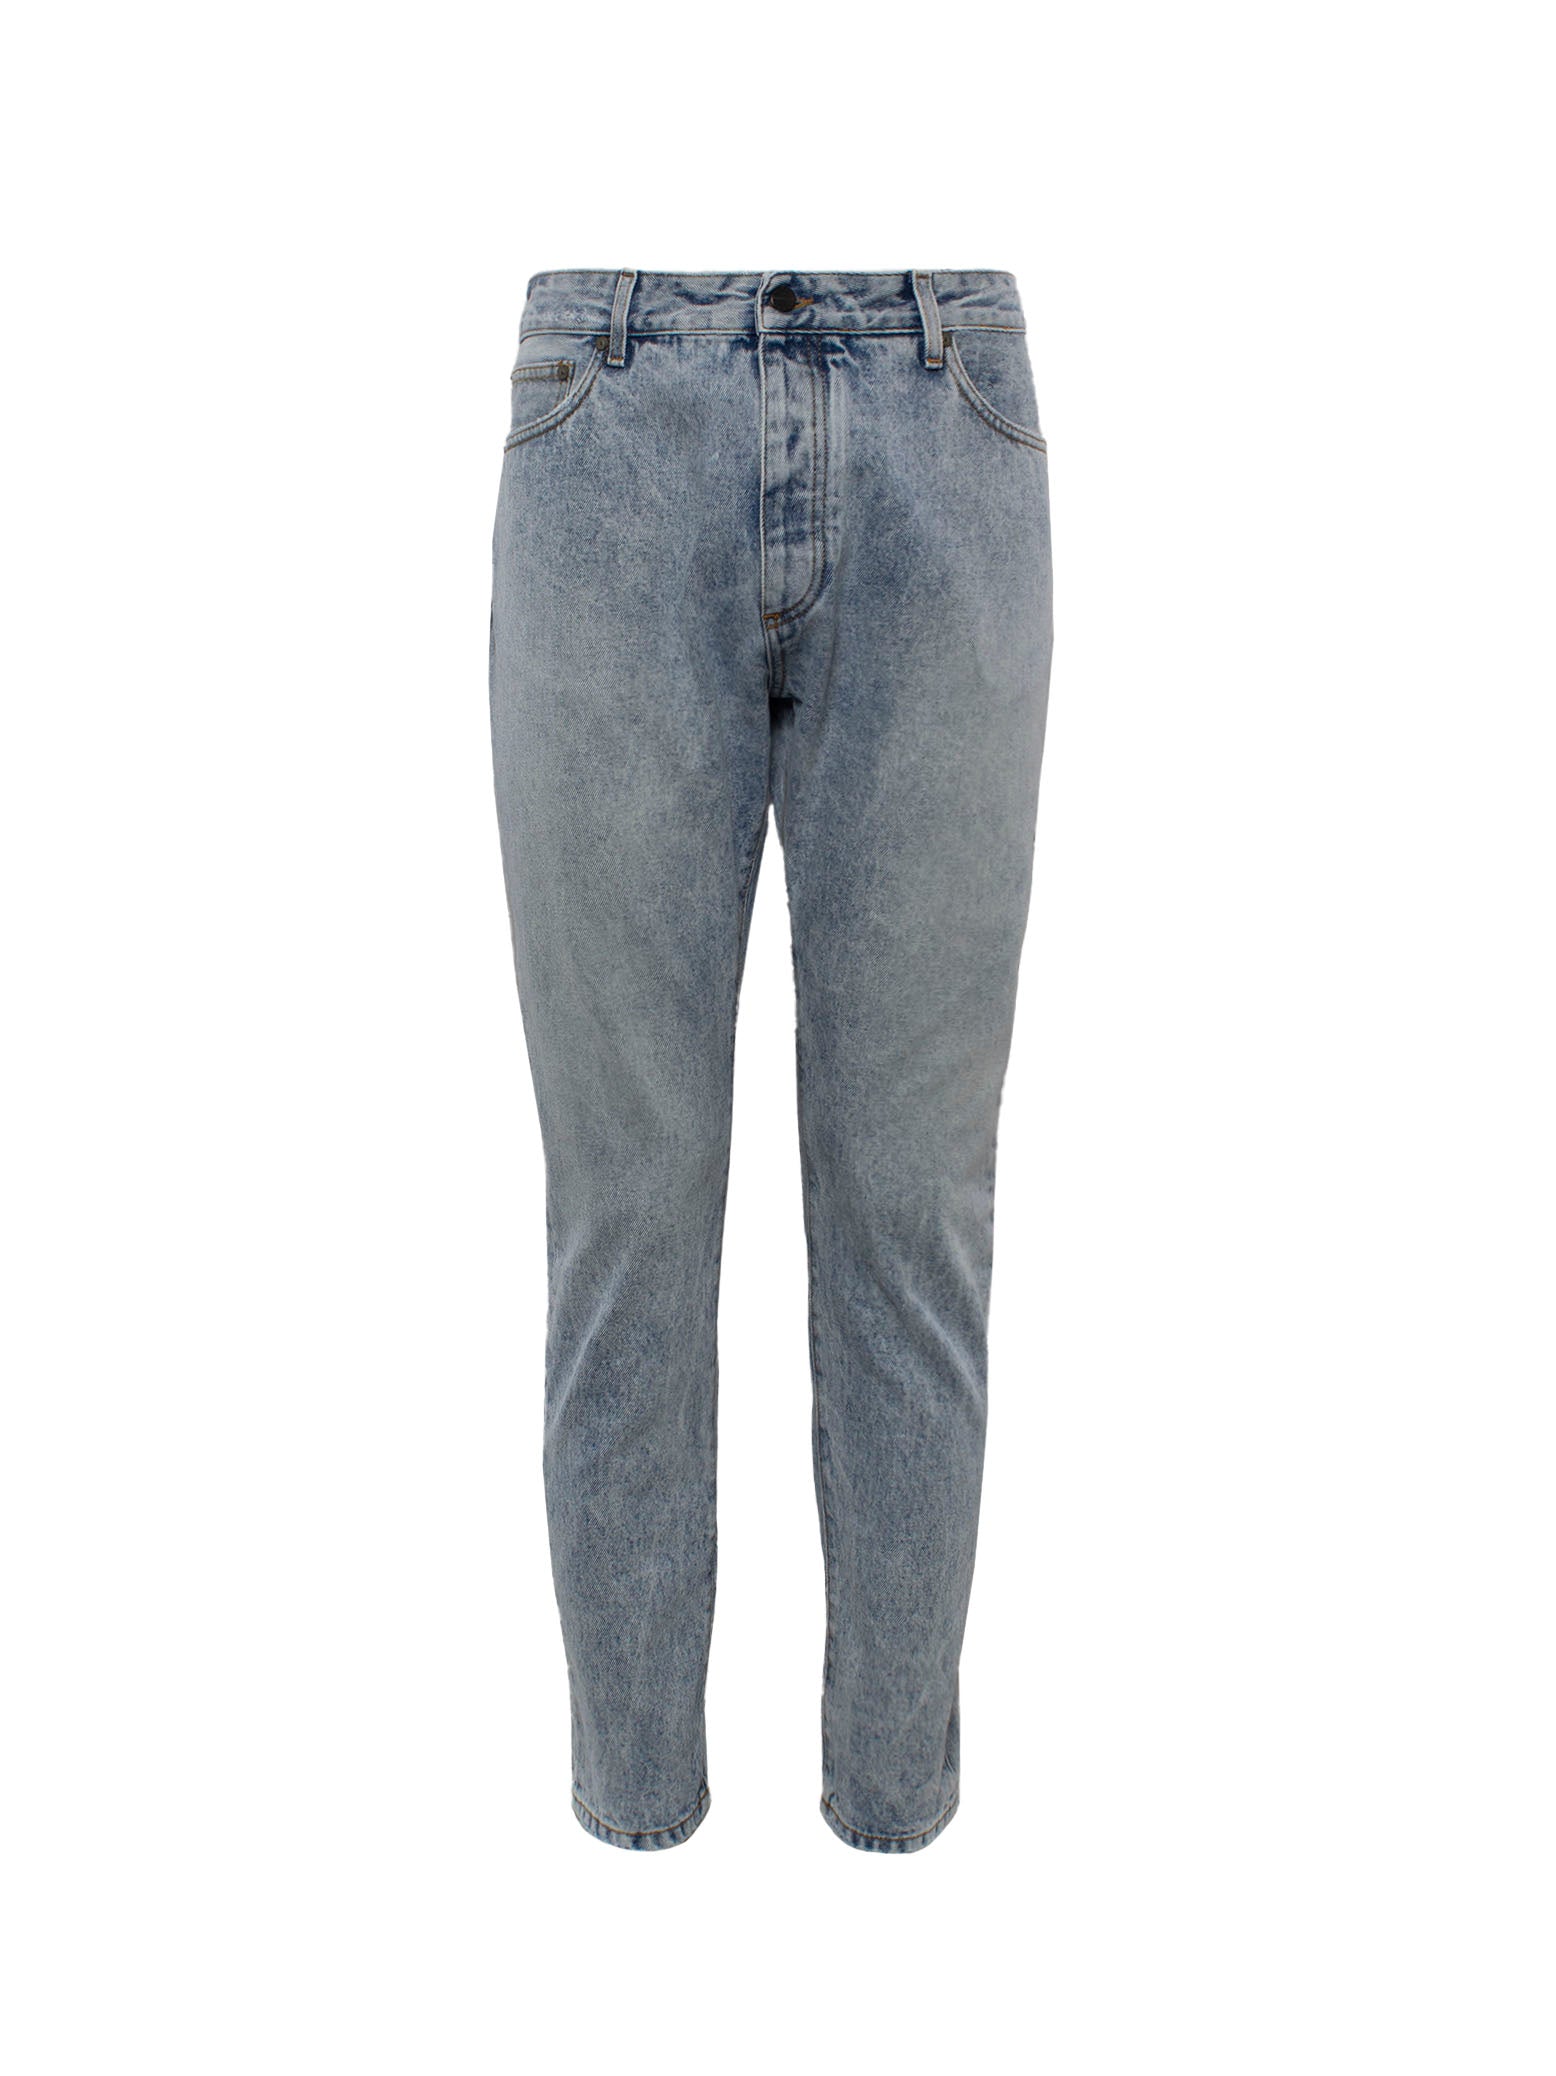 CURVED-LOGO PRINT JEANS